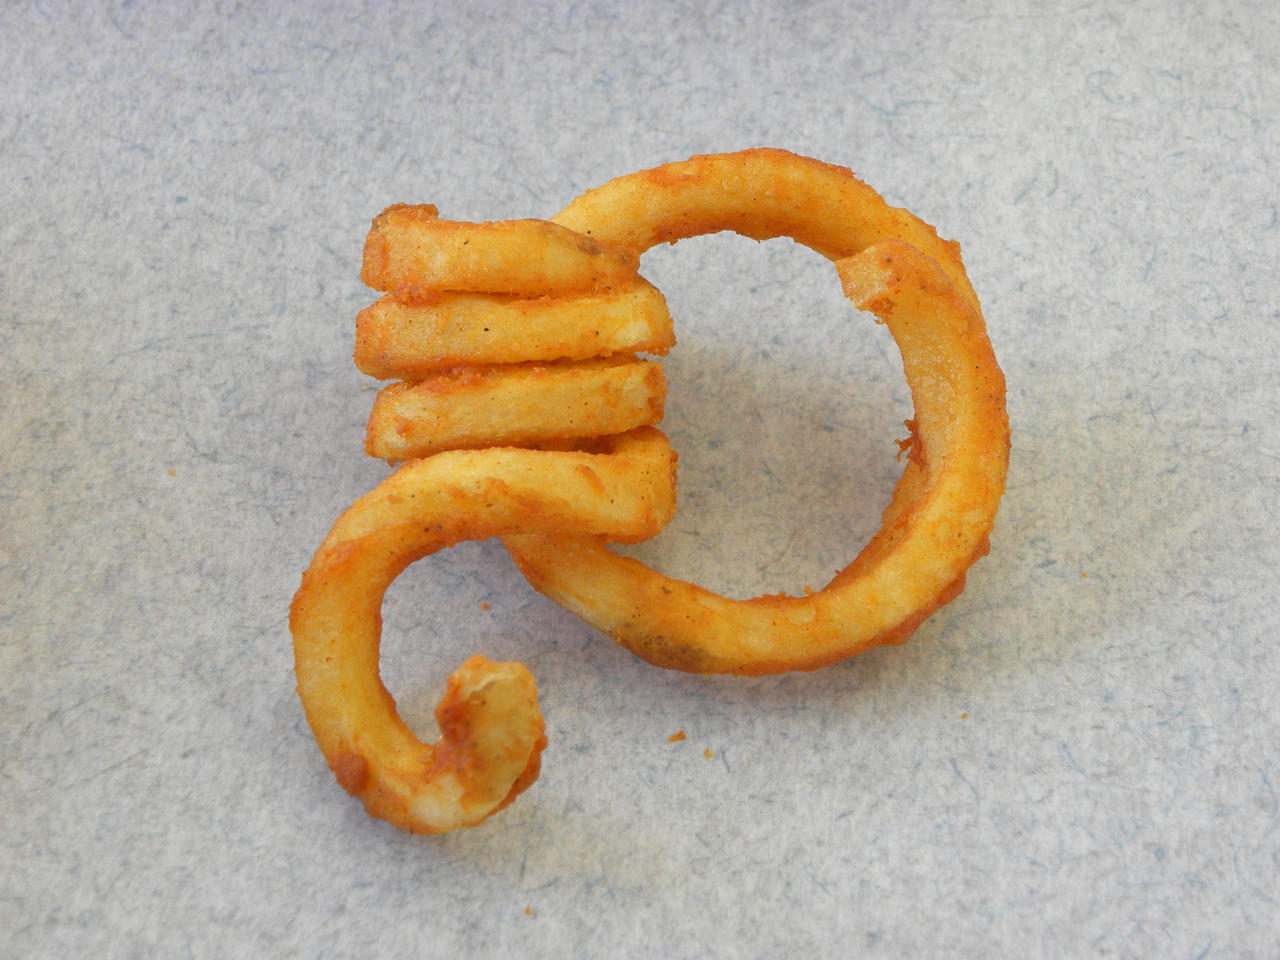 Curly fries!